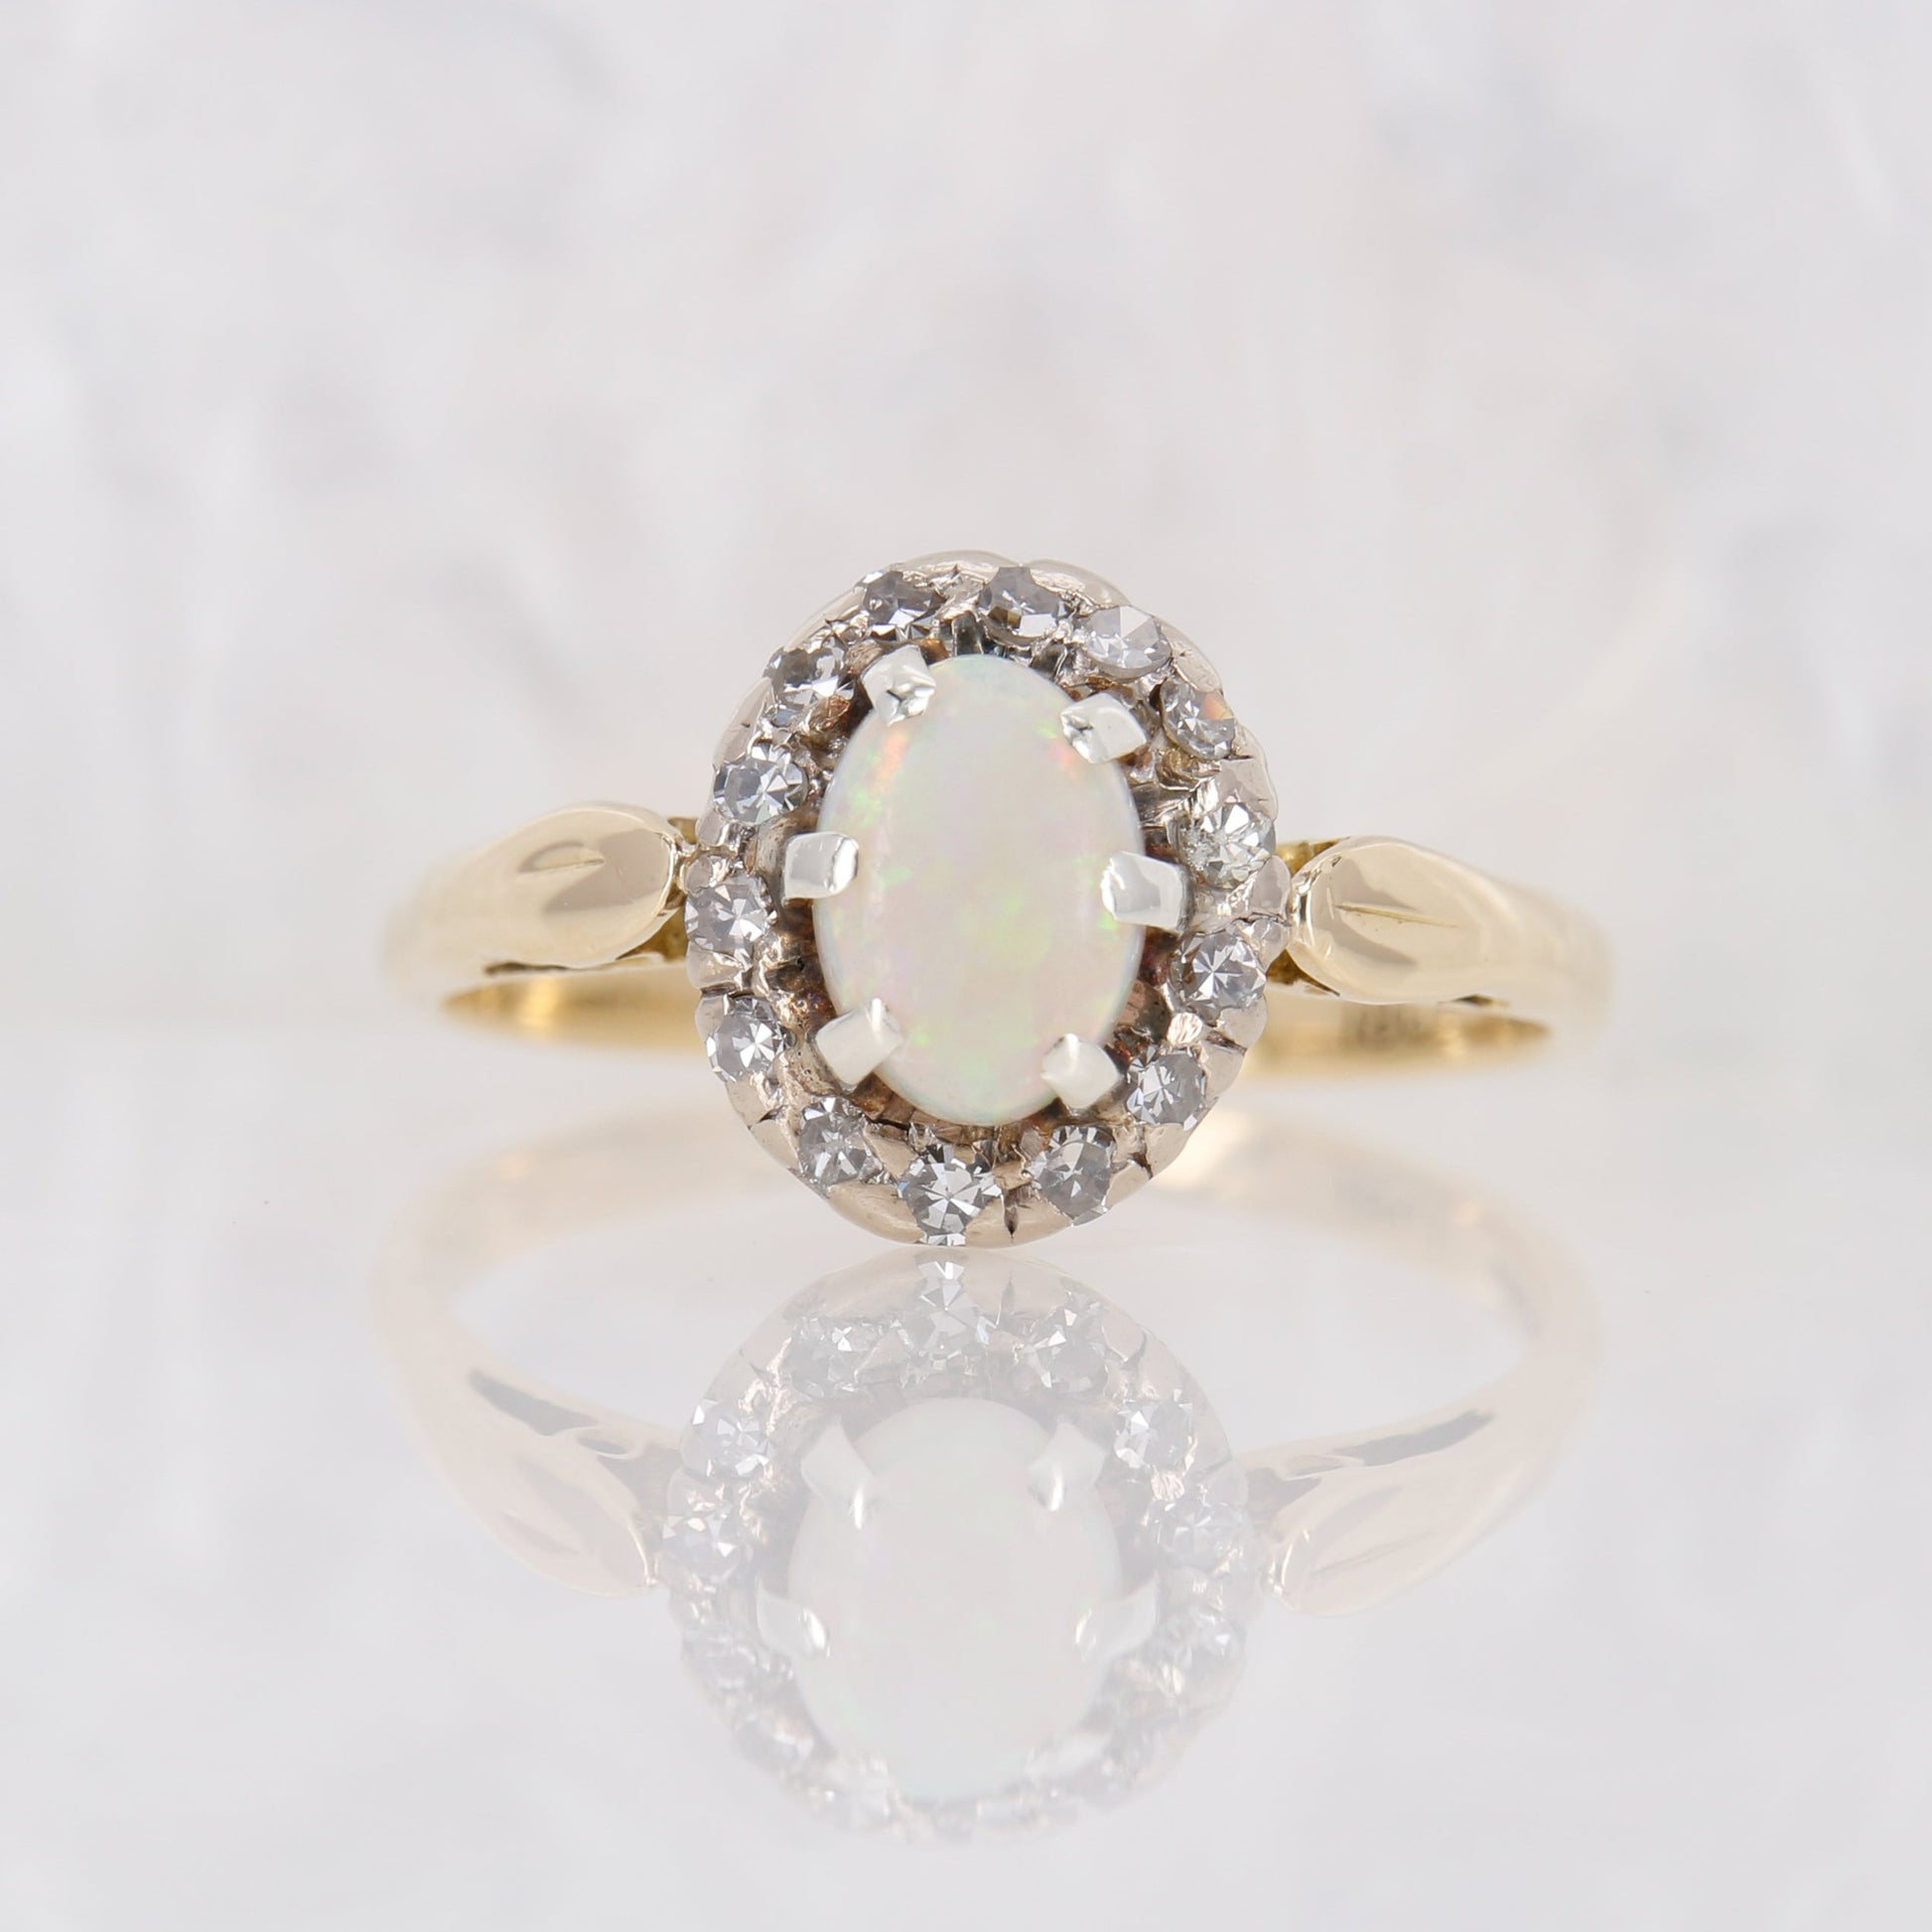 Vintage Opal and Diamond Ring, Antique Opal and Diamond Halo Ring 18ct Yellow Gold.